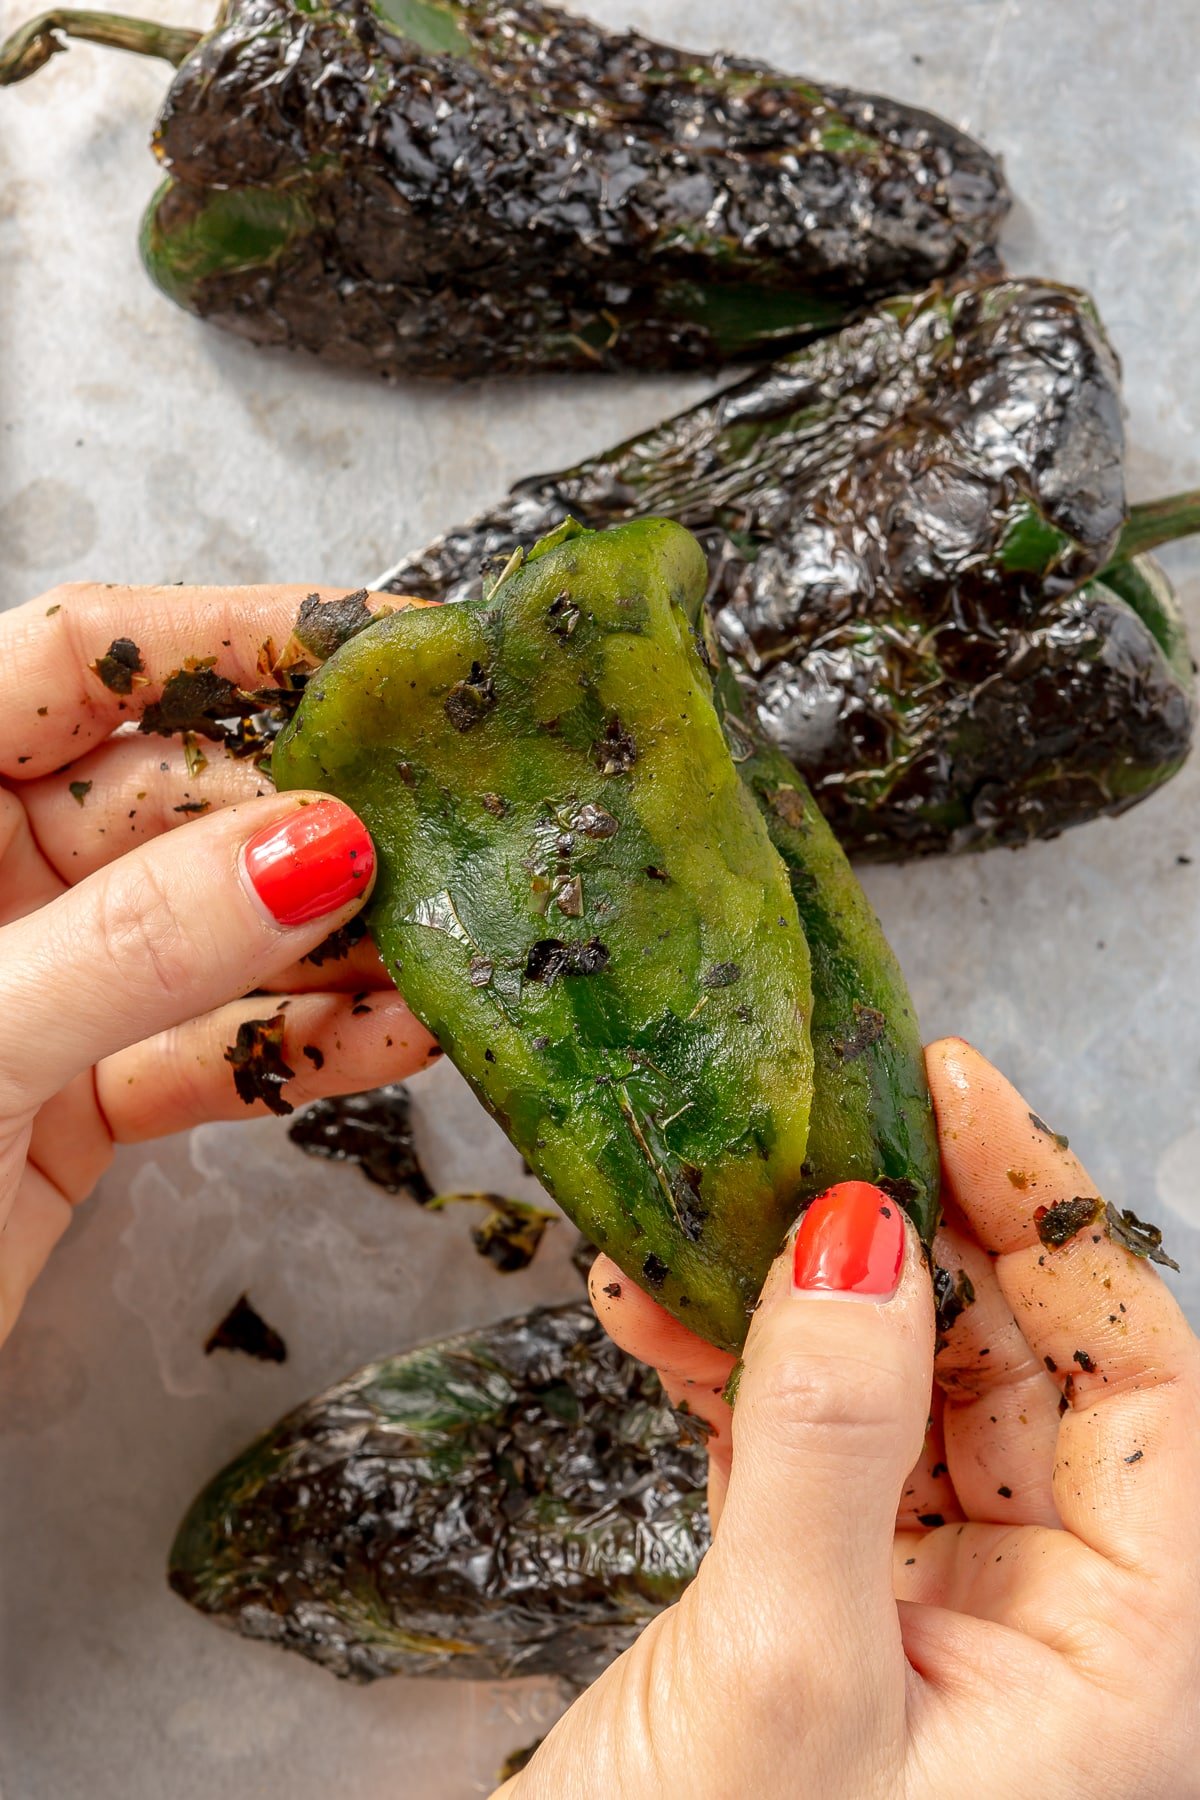 2 hands are shown removing the charring from the green peppers.